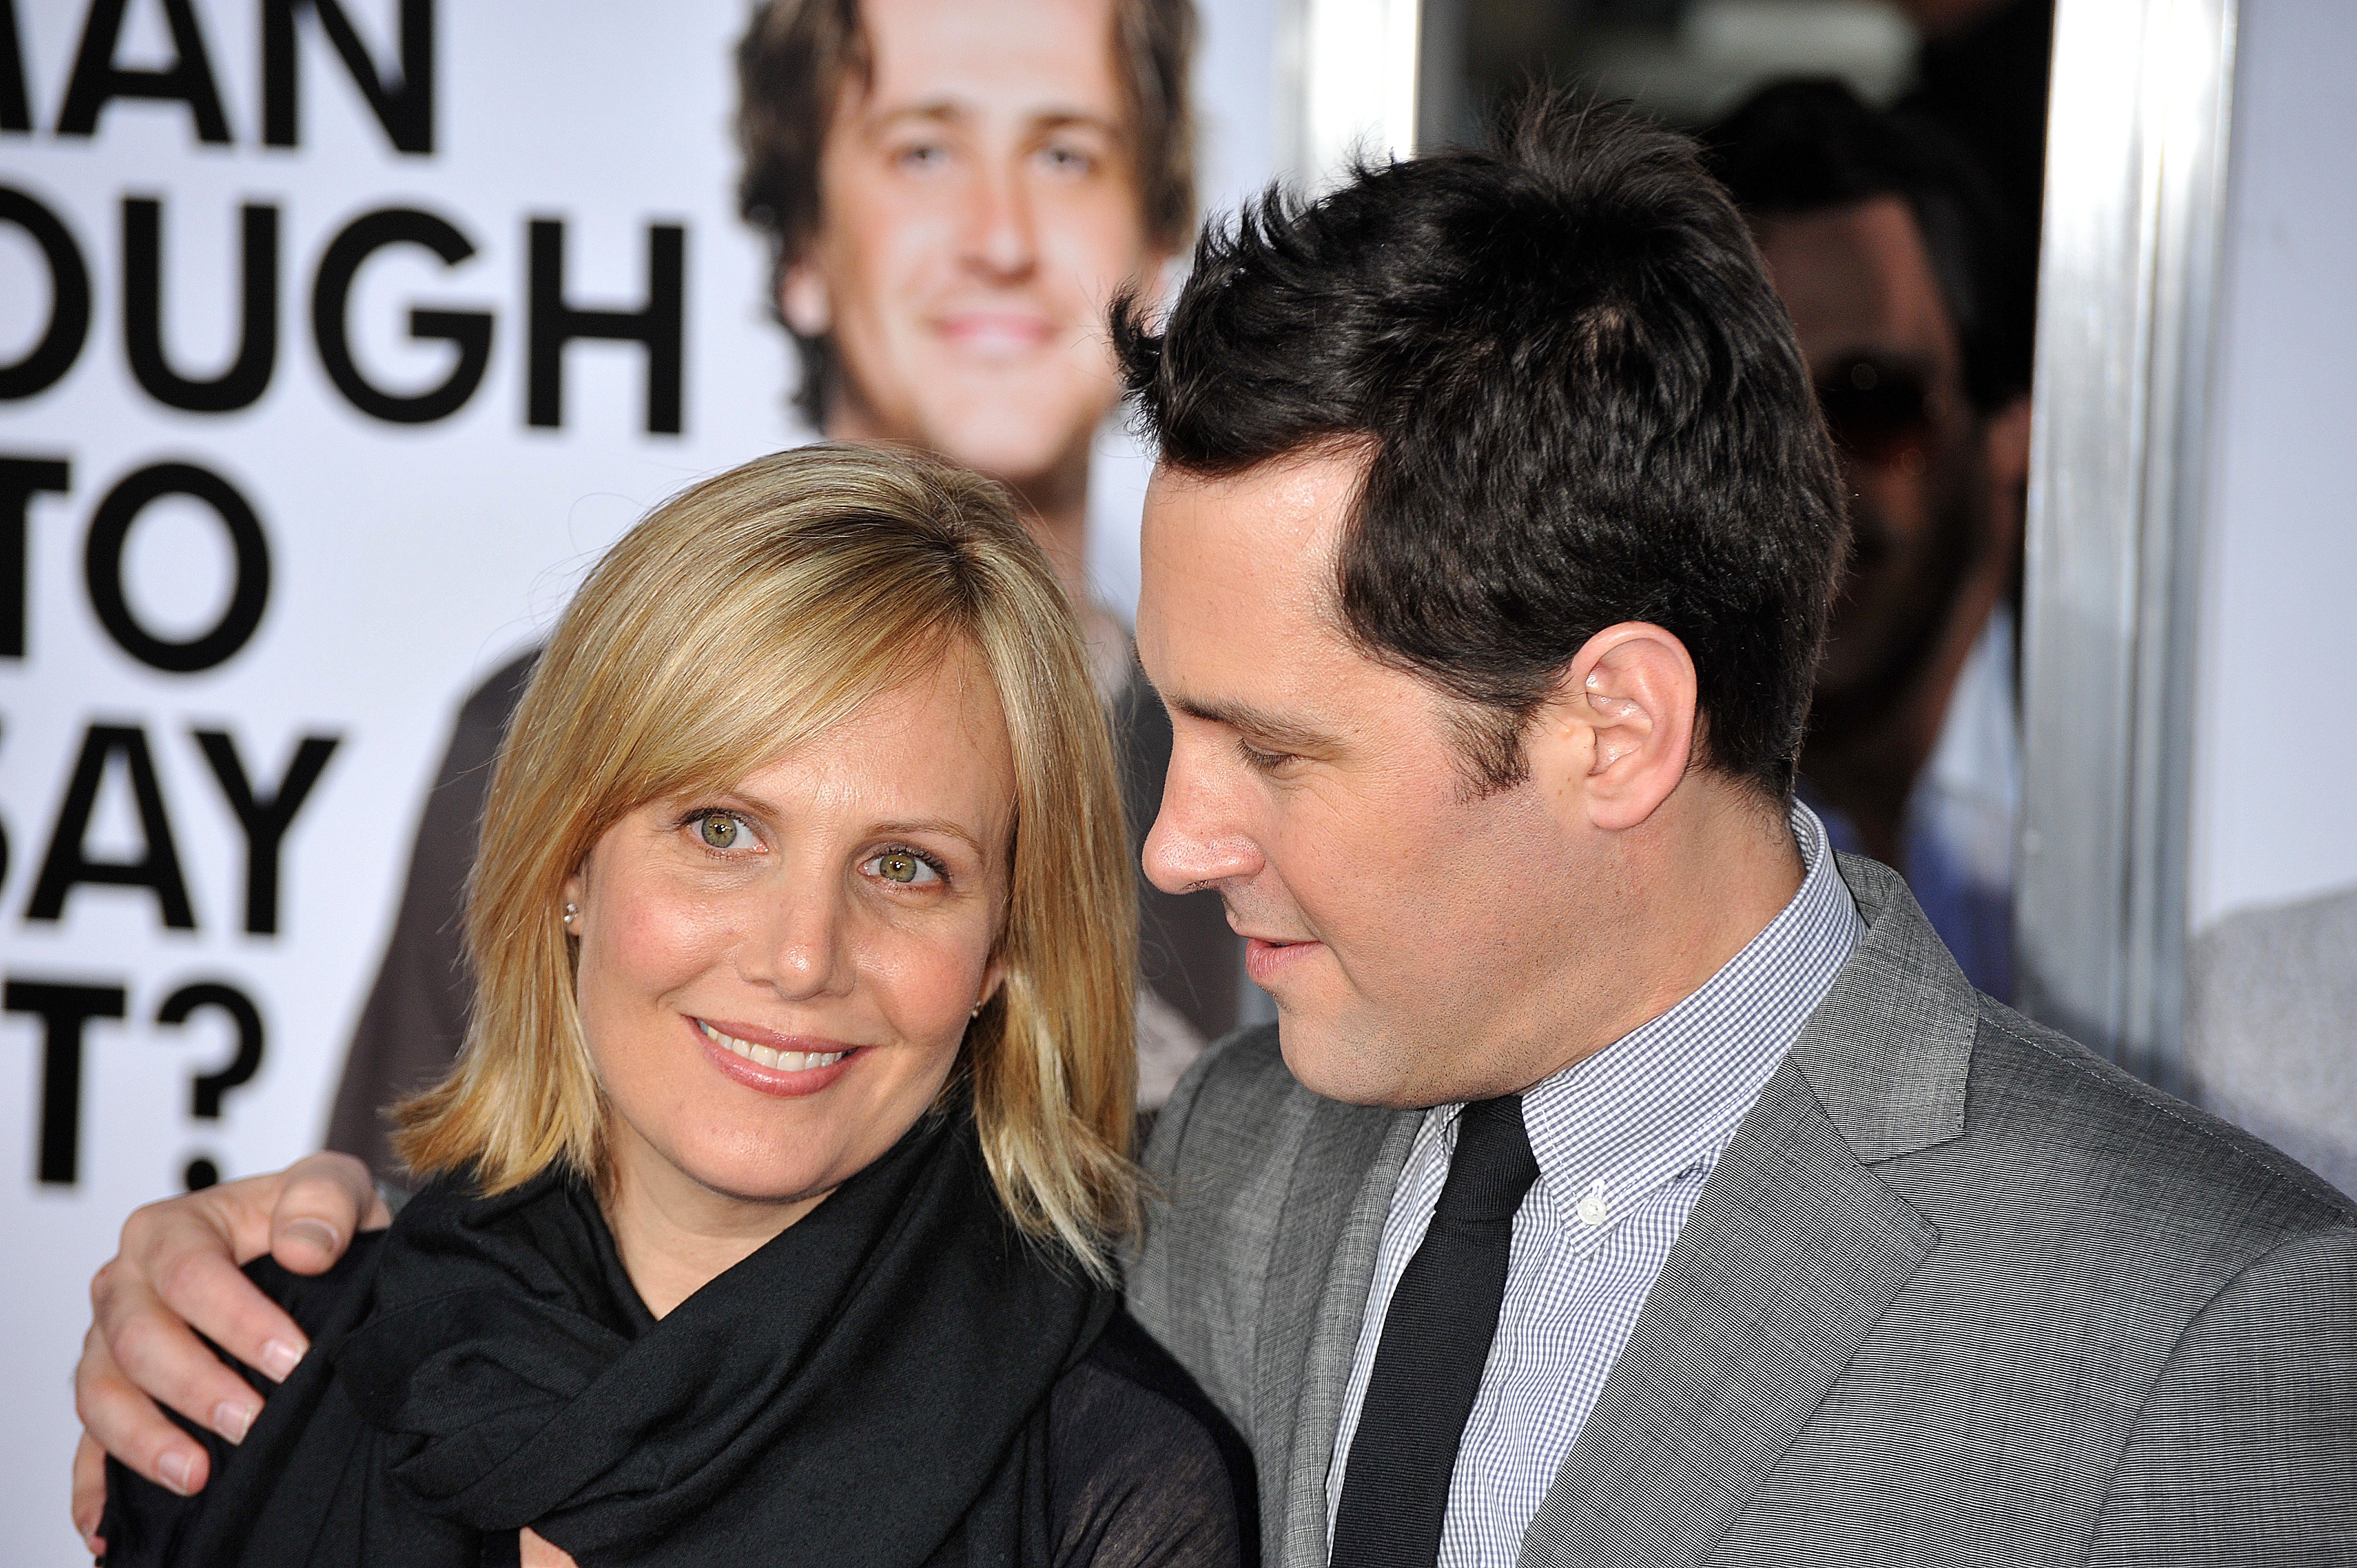 Paul Rudd and his wife Julie Yaeger arrive at the premiere of "I Love You, Man" held at Mann's Village Theater on March 17, 2009, in Westwood, California. | Source: Getty Images